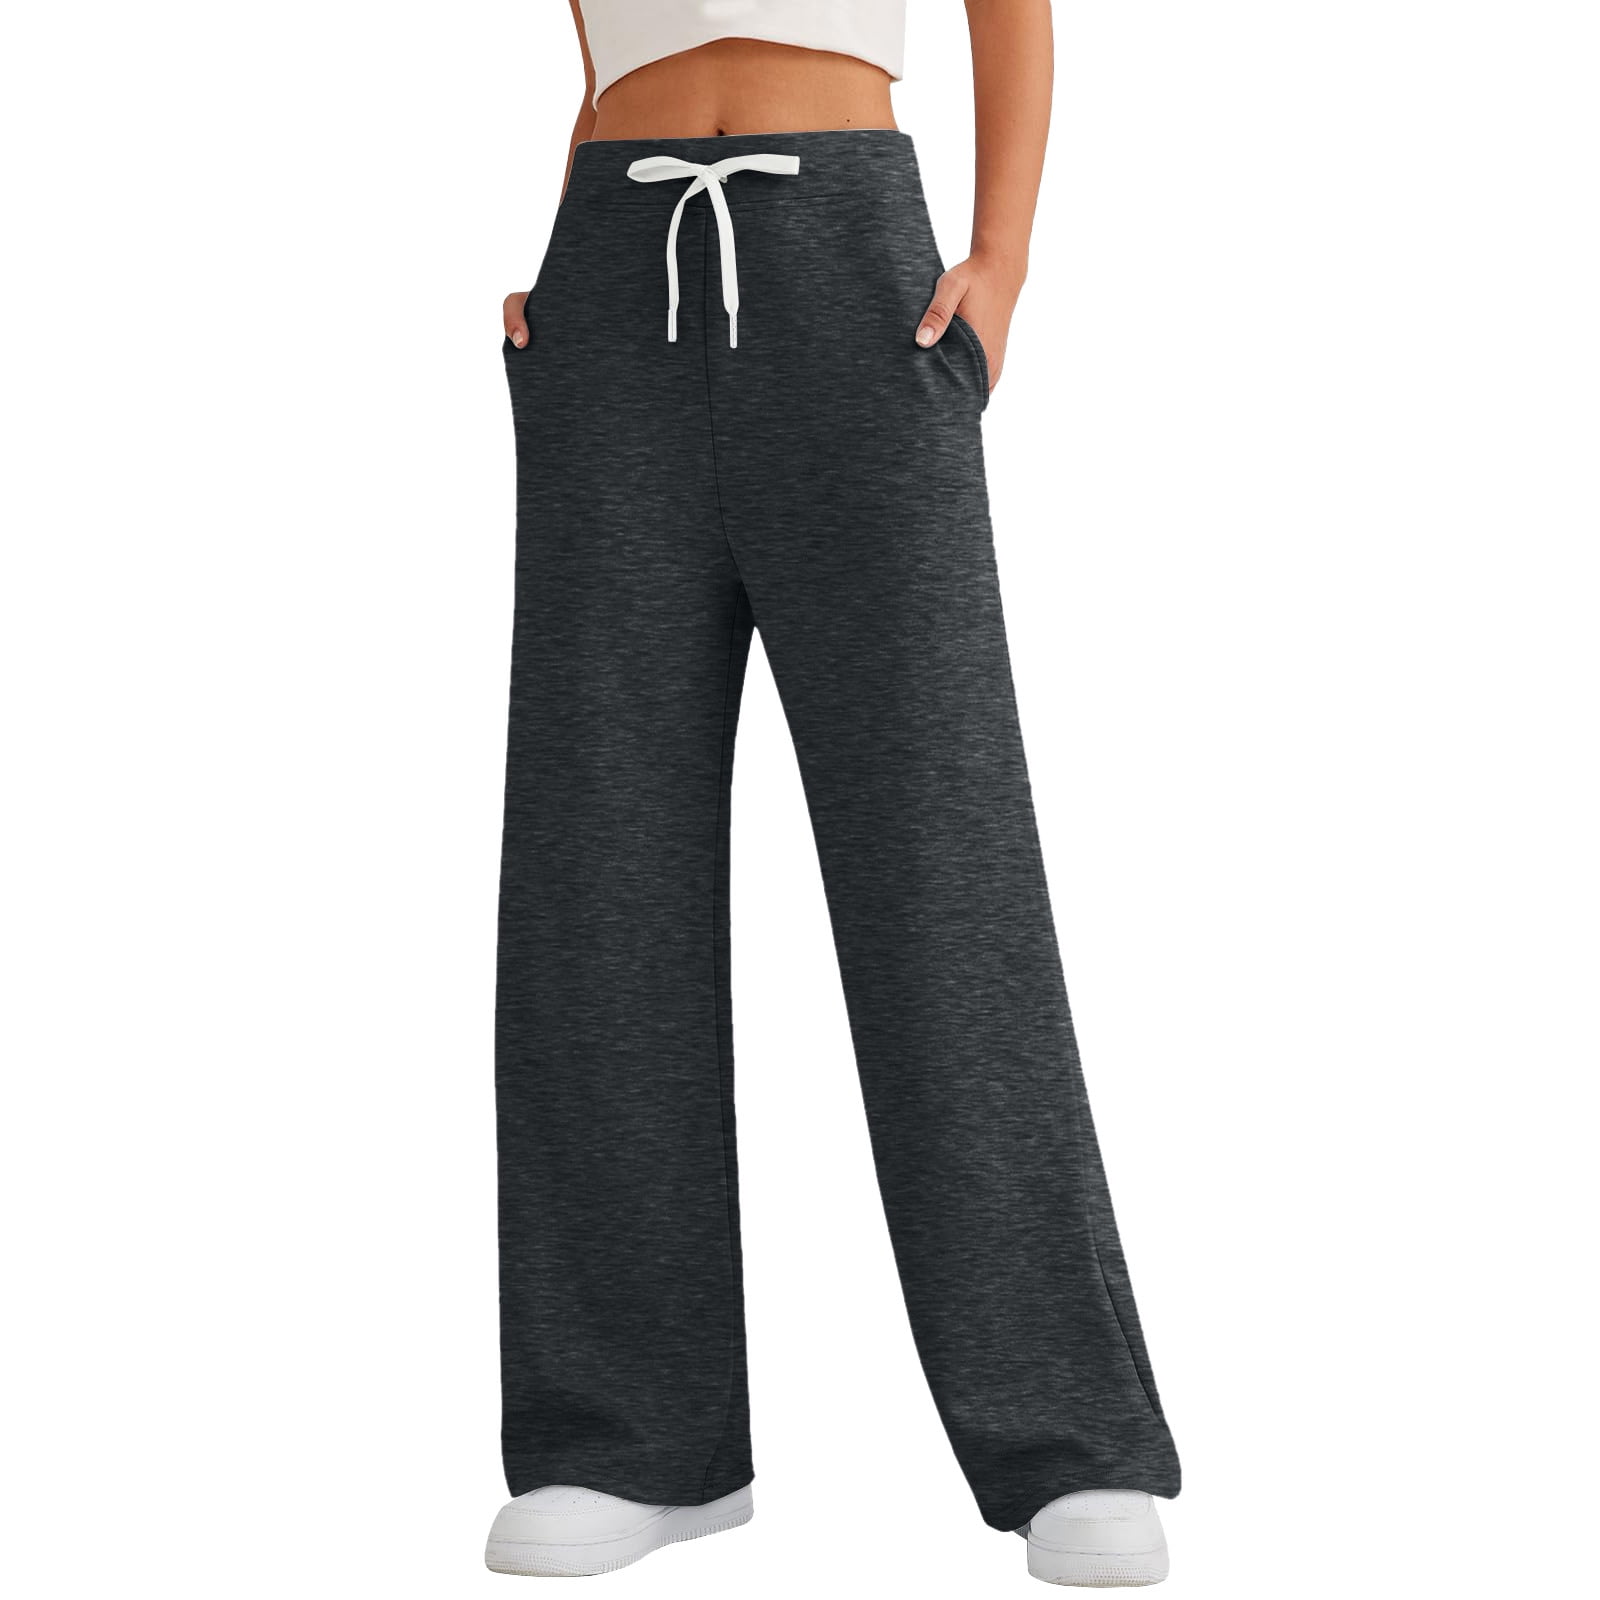 Susanny Straight Leg Sweatpants Straight Leg with Pockets Baggy Drawstring  Joggers Pants High Waisted Soft Fleece Lined Petite Relaxed Fit Sweat Pants